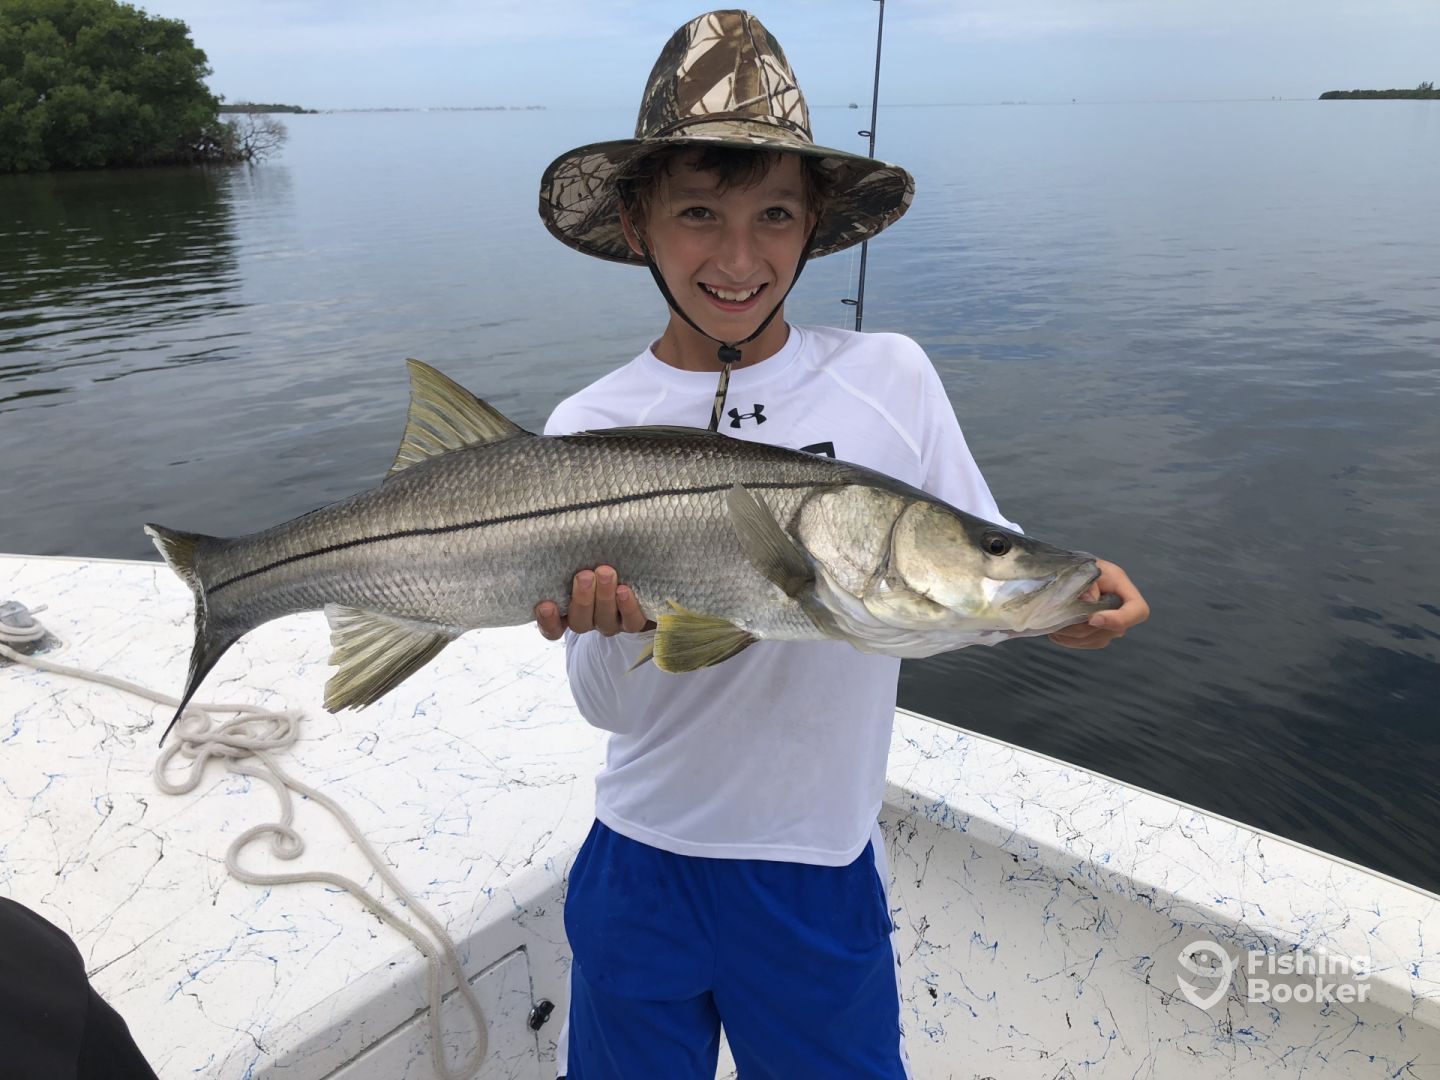 See more of Top Slot Fishing Charters on Facebook.Log In.Forgot account?or.Create New Account.Not Now.Top Slot Fishing Charters.Local Service in Matlacha, Florida.5.5 out of 5 stars.Always Open.Community See All.1, people like this.1, people follow this.58 check-ins.About See All.Pine Island Rd NW ( mi) Matlacha, FL Get Directions () Contact 5/5.